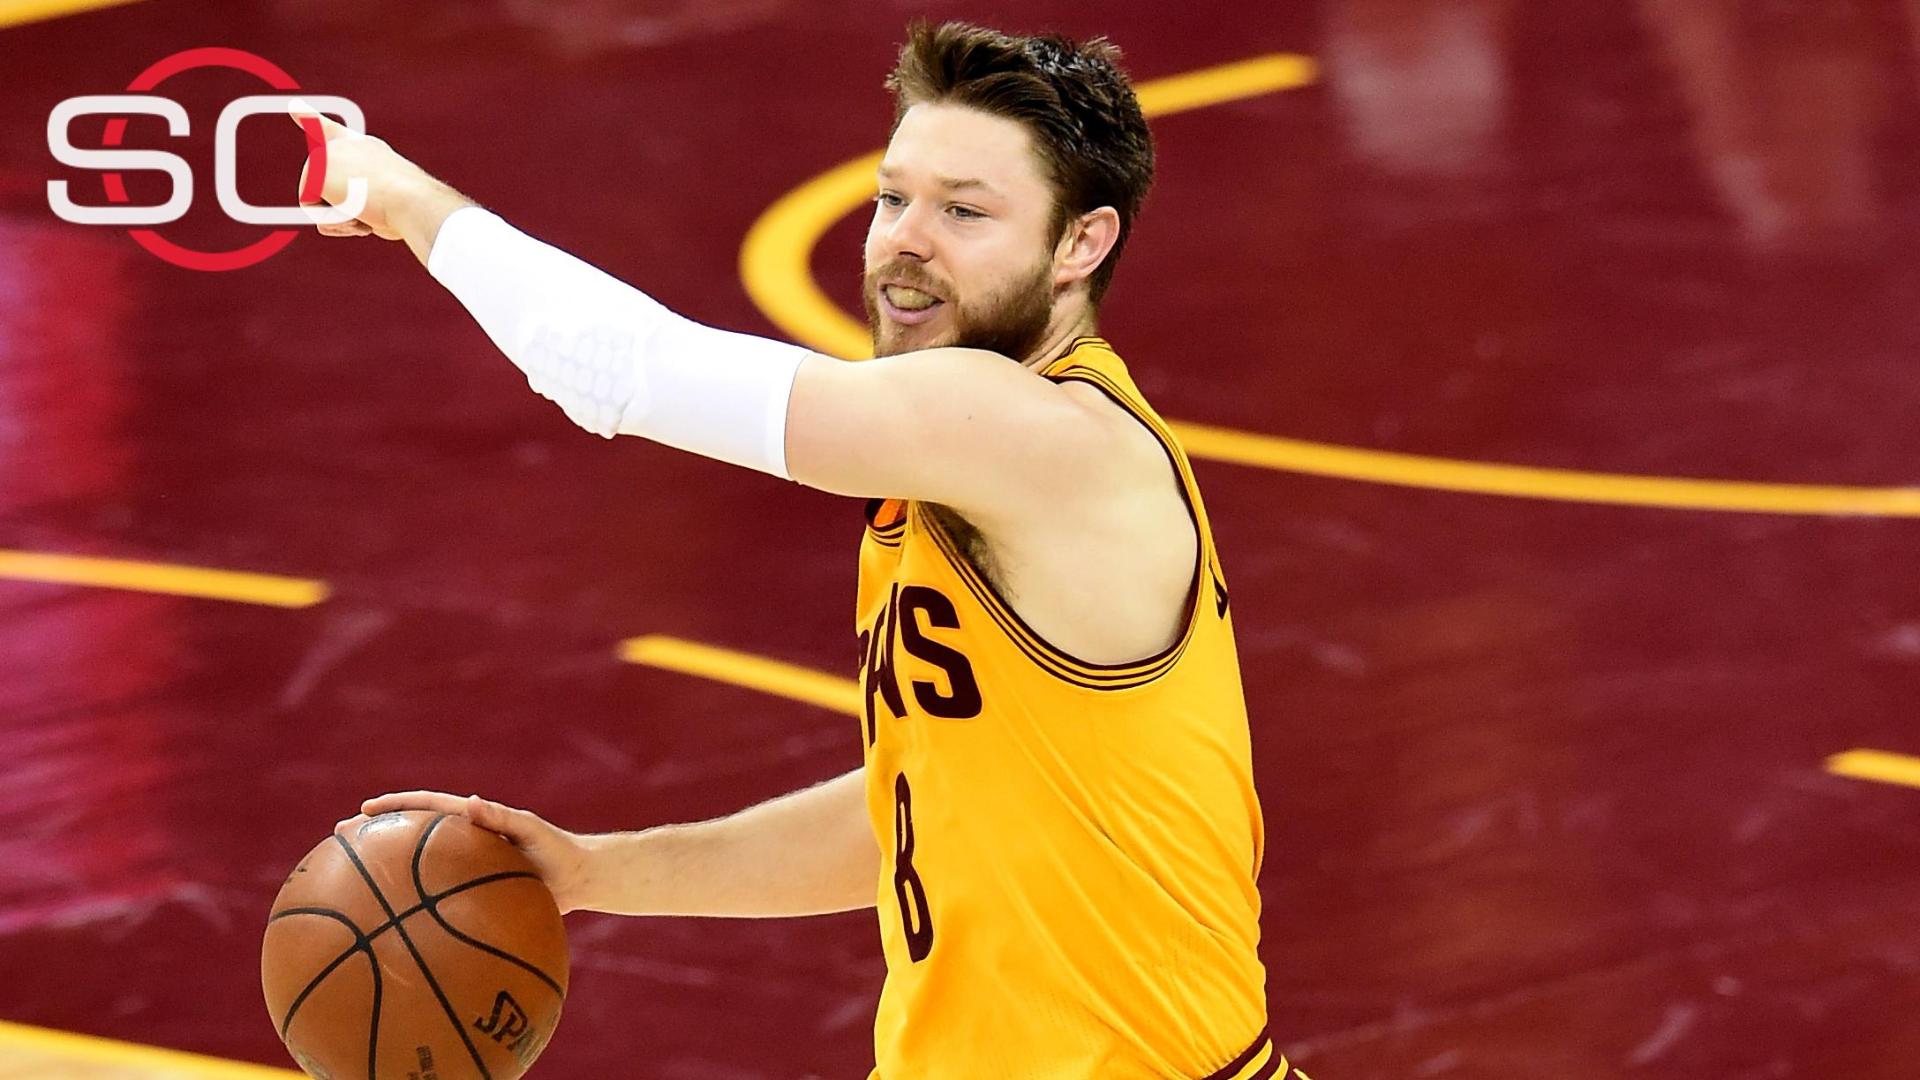 Matthew Dellavedova of Cleveland Cavaliers treated for dehydration, to be  released from hospital - ESPN